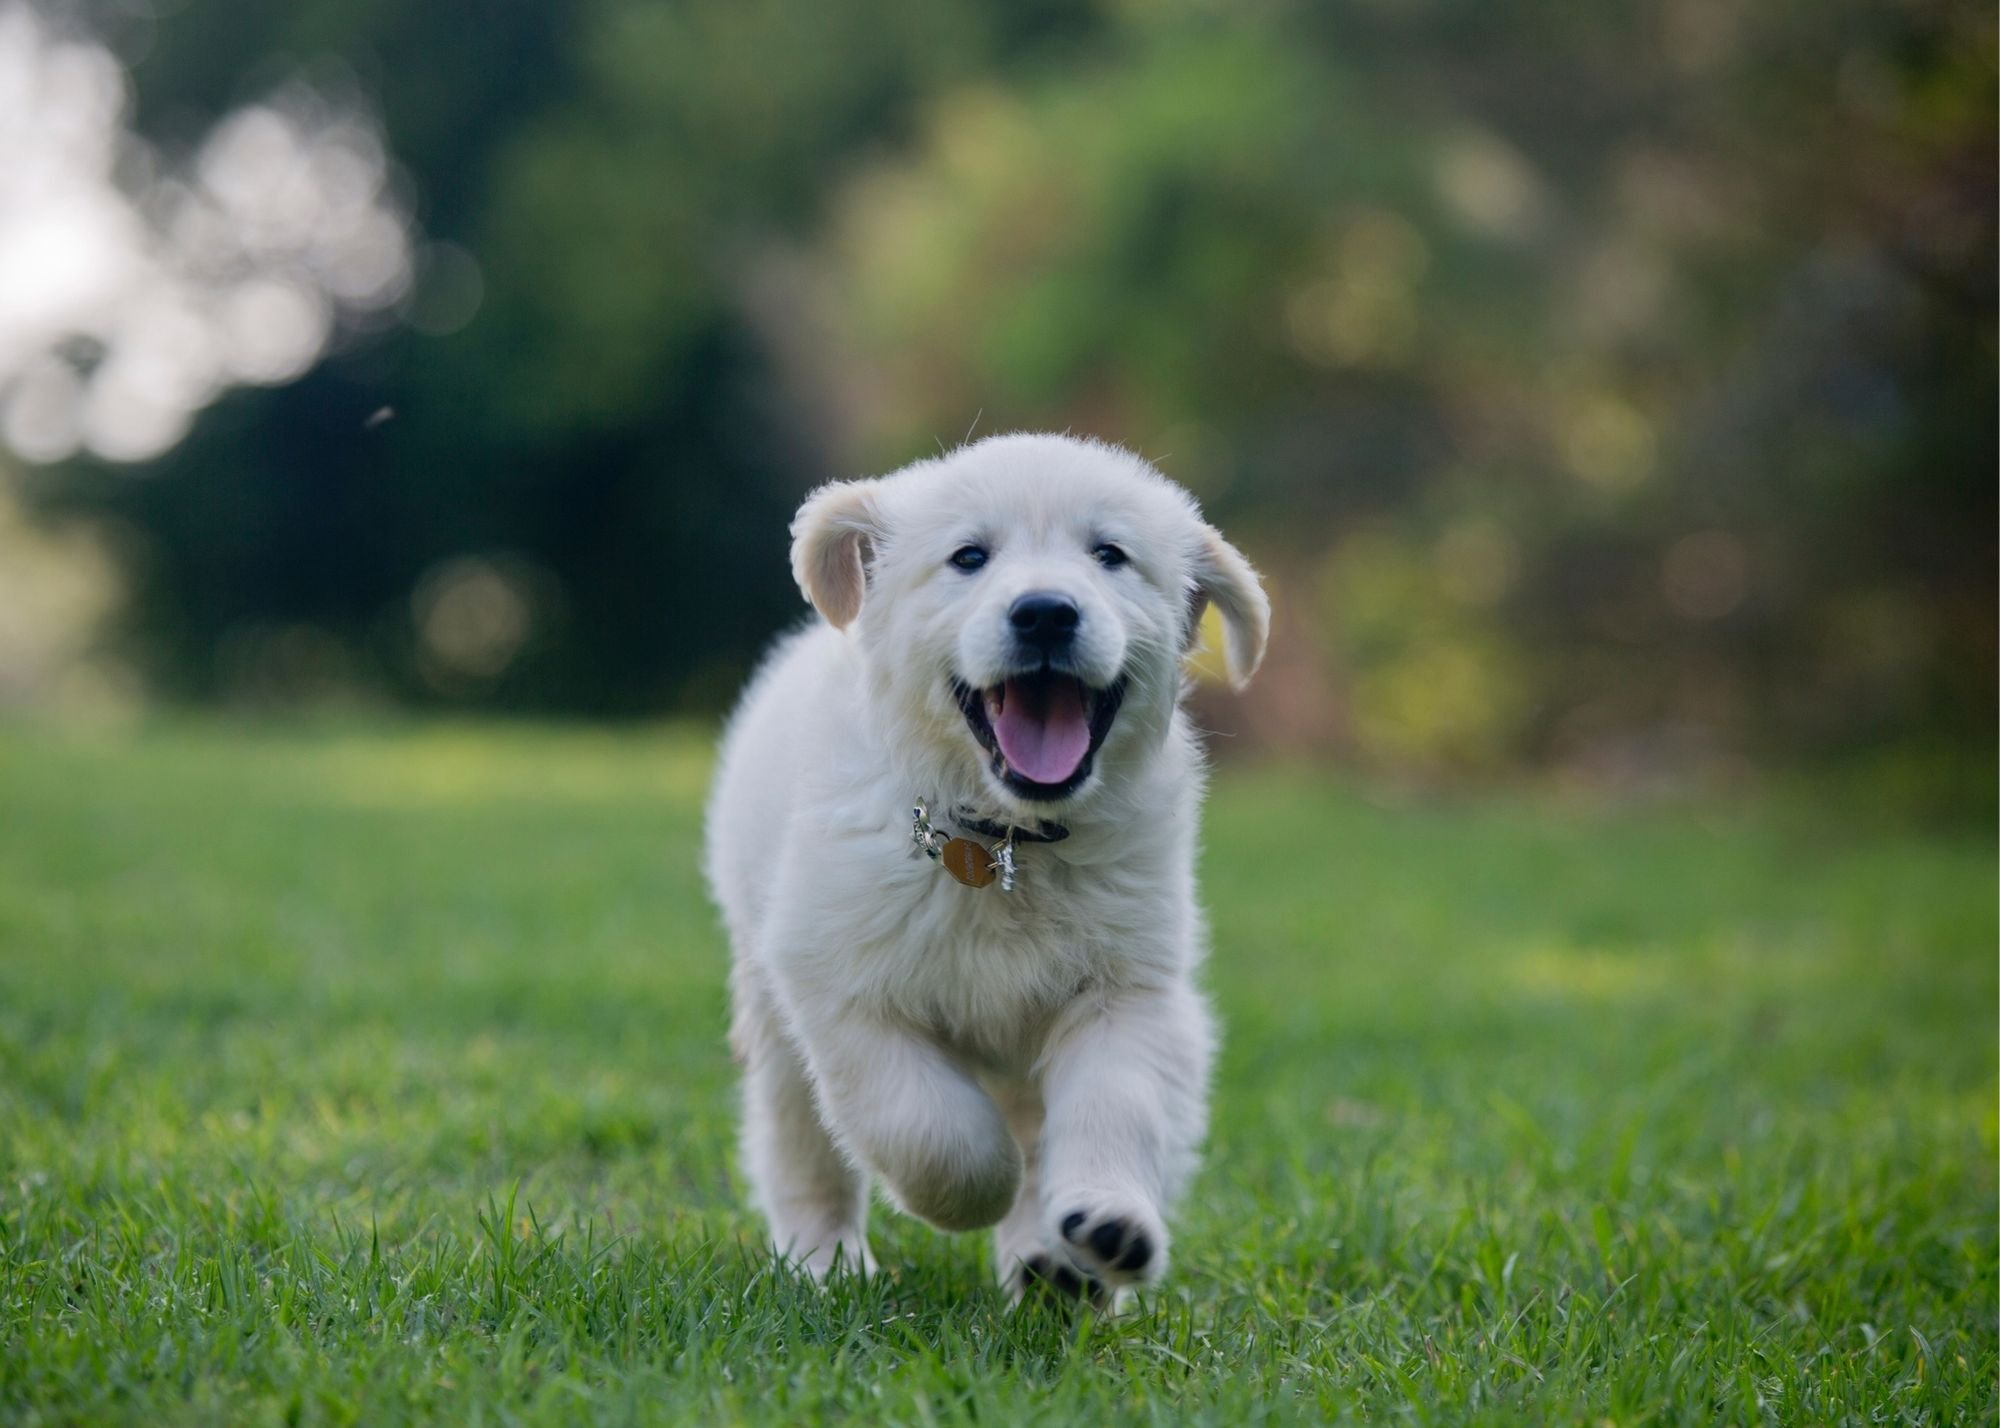 How to Calm an Over-Excited Puppy! — The Puppy Academy